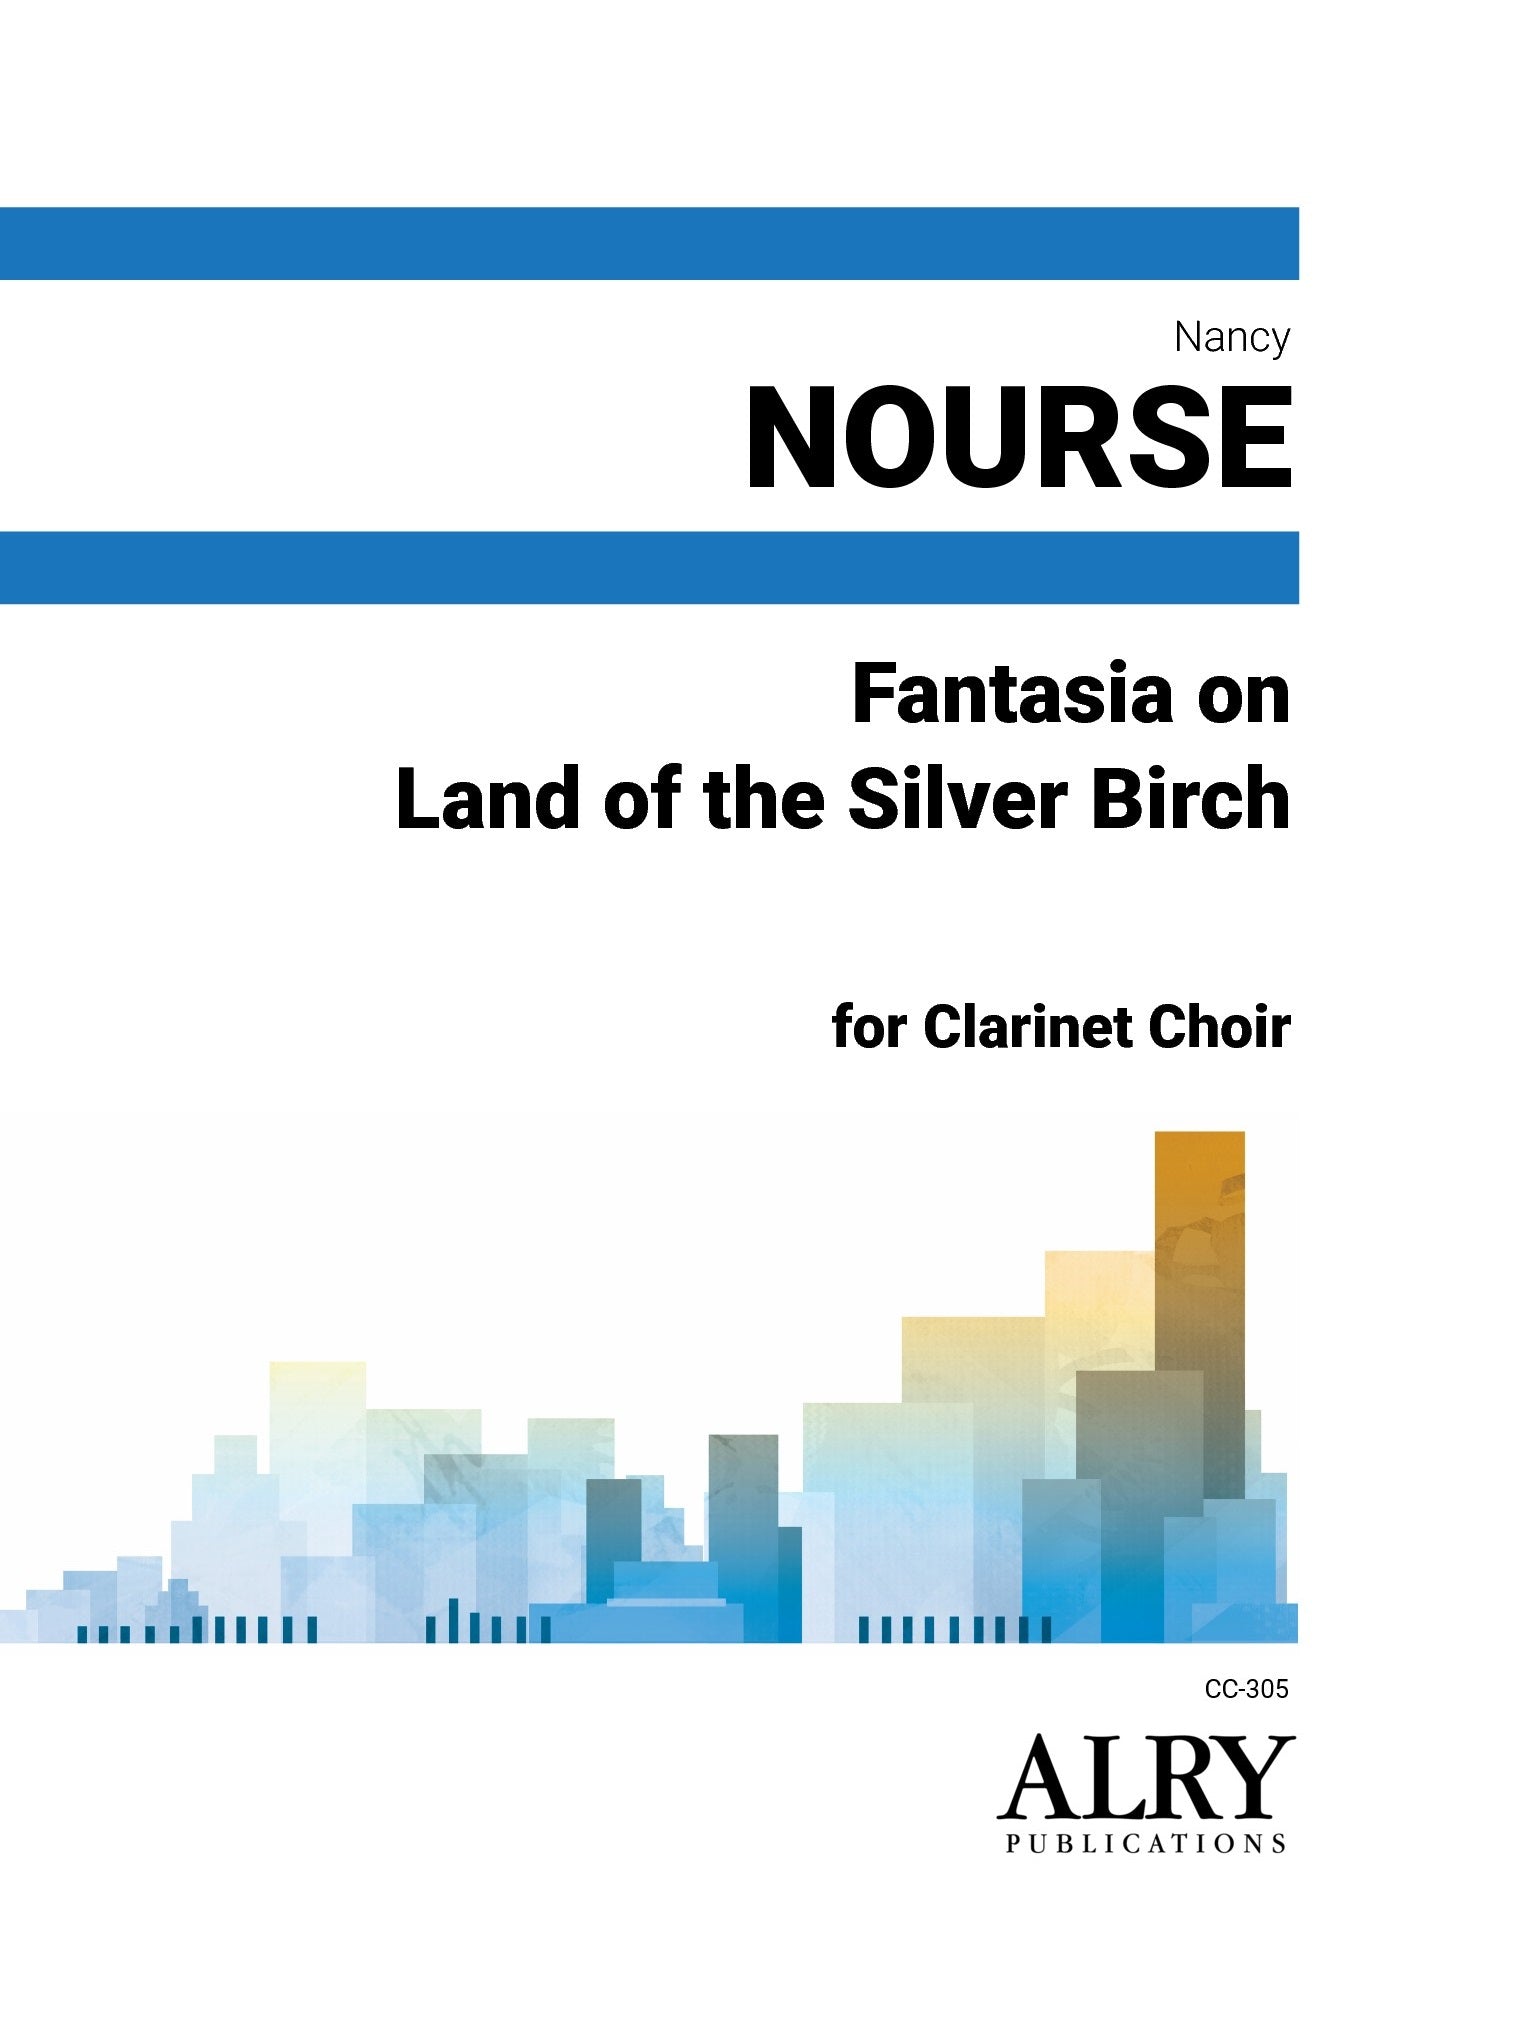 Nourse - Fantasia on Land of the Silver Birch for Clarinet Choir